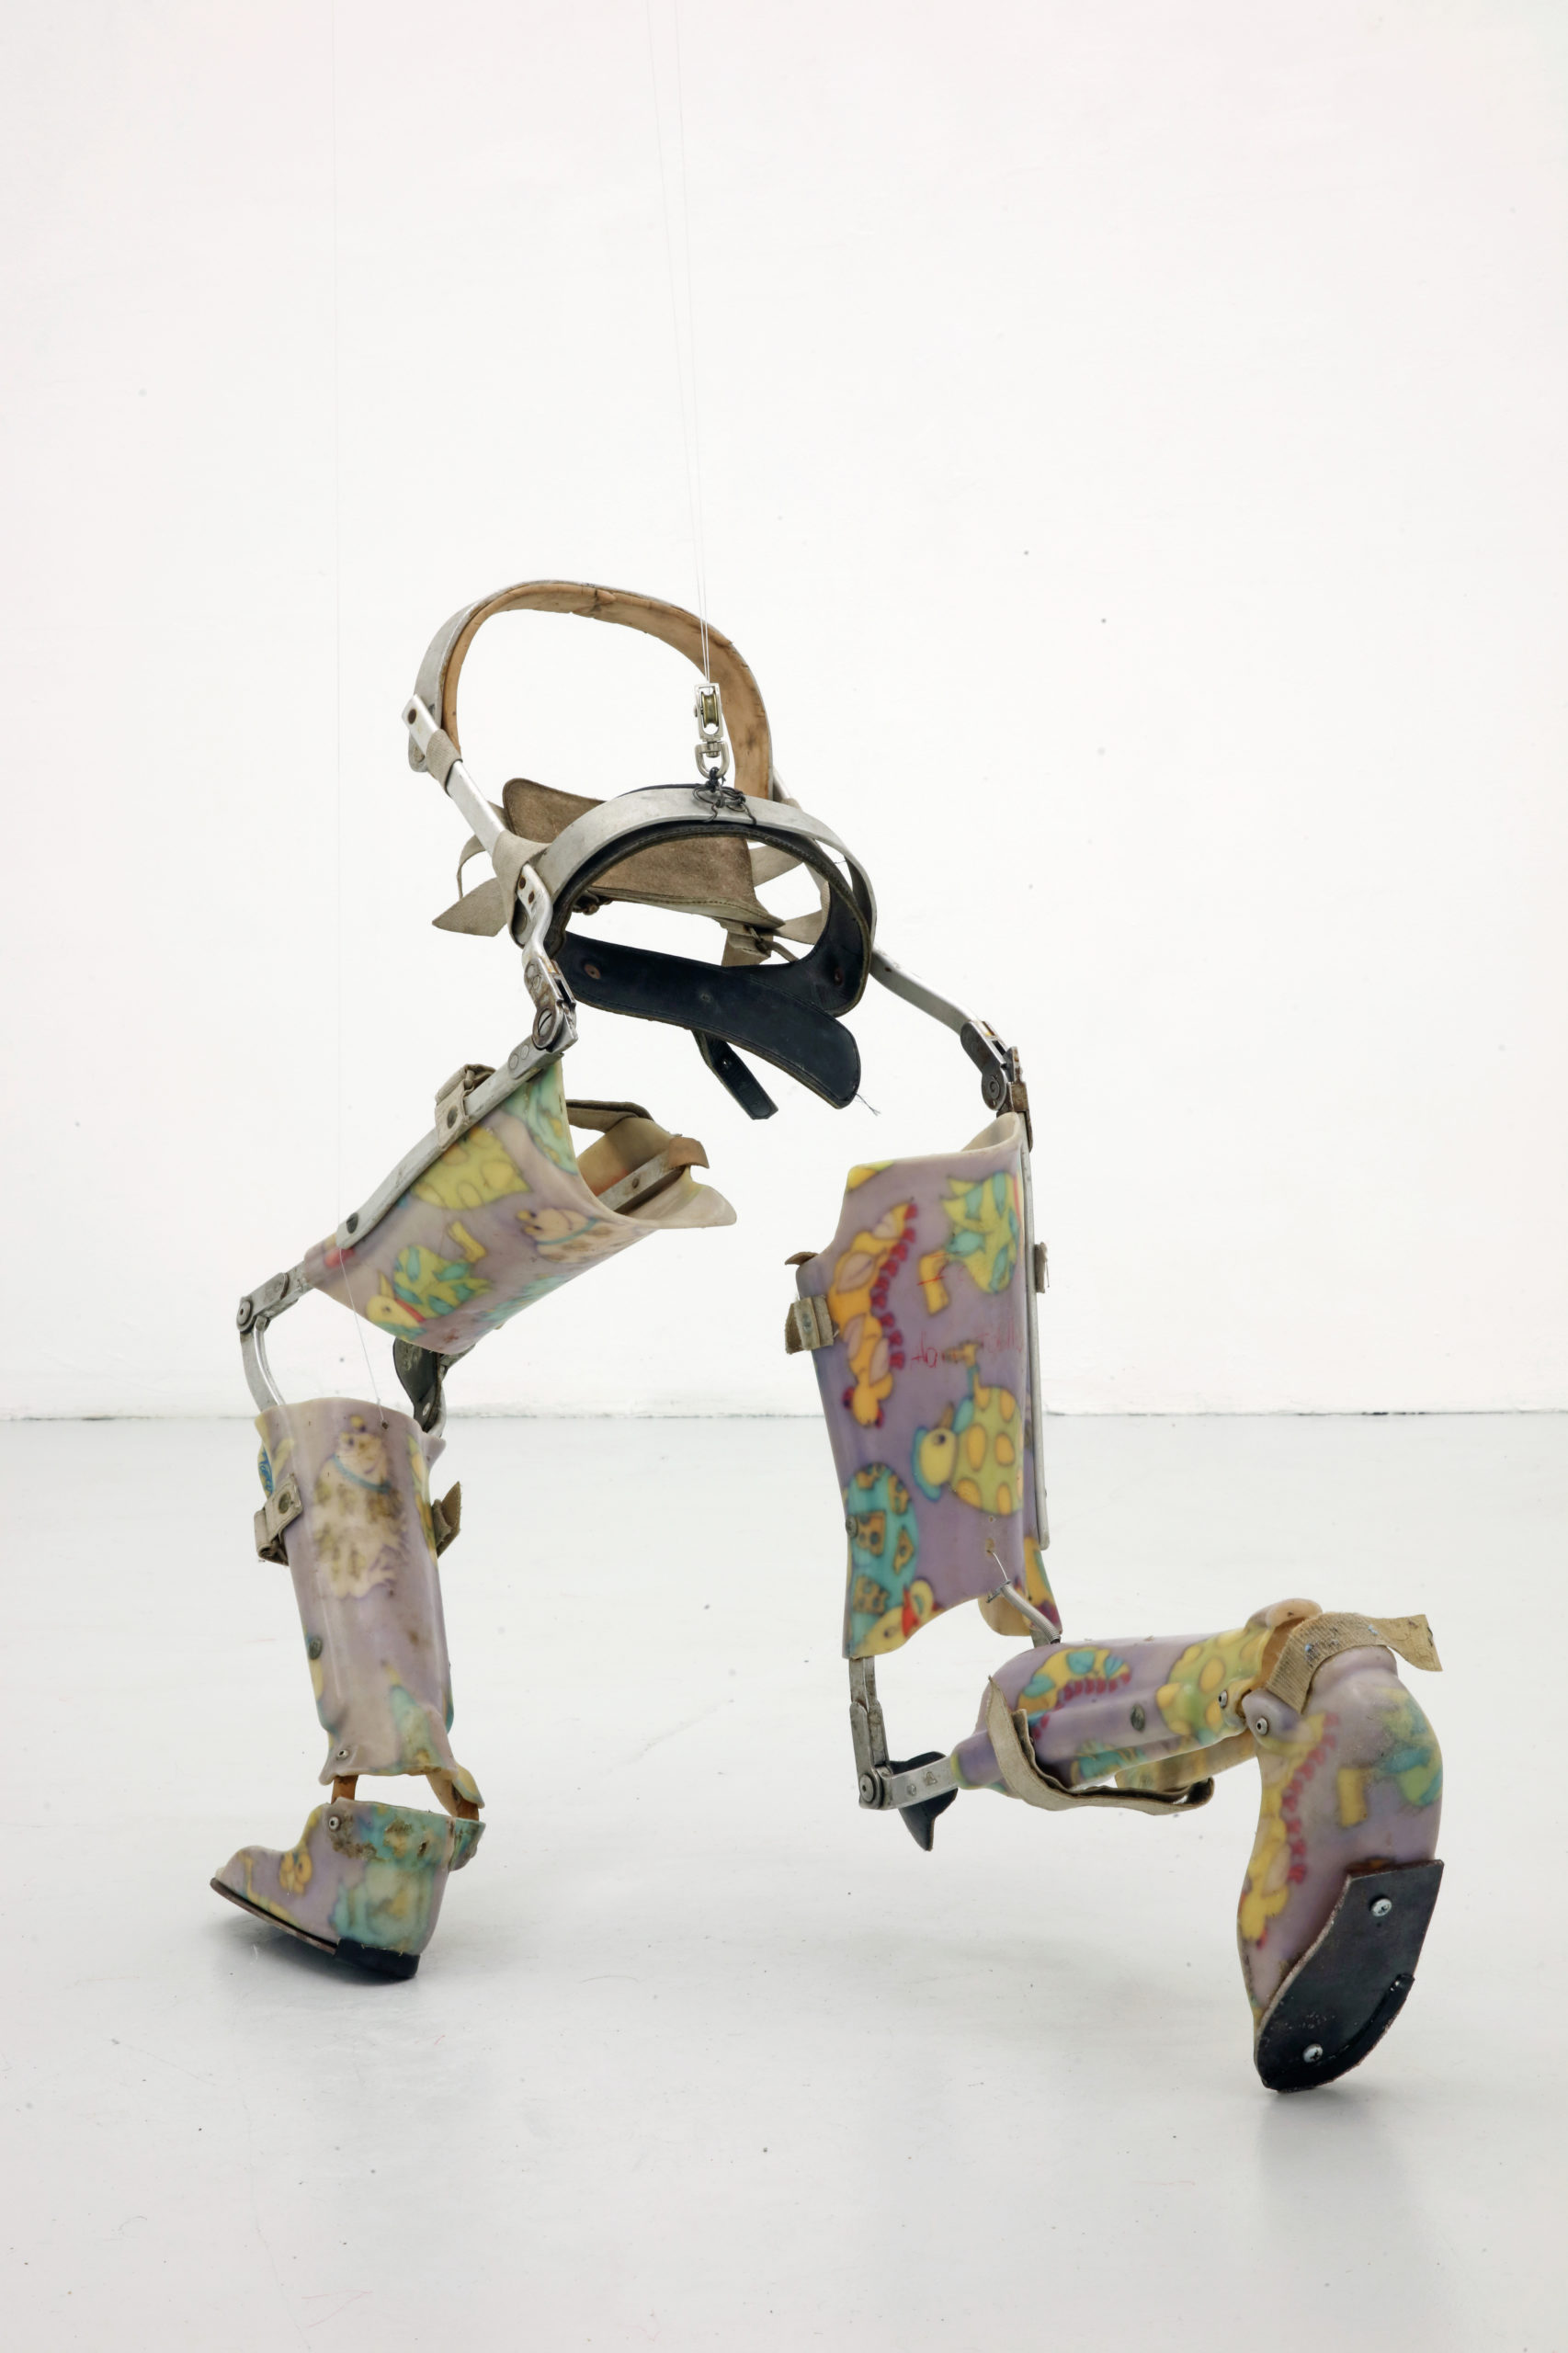 a half bodied figure made out of prosthetics is placed in a running position against white gallery walls.